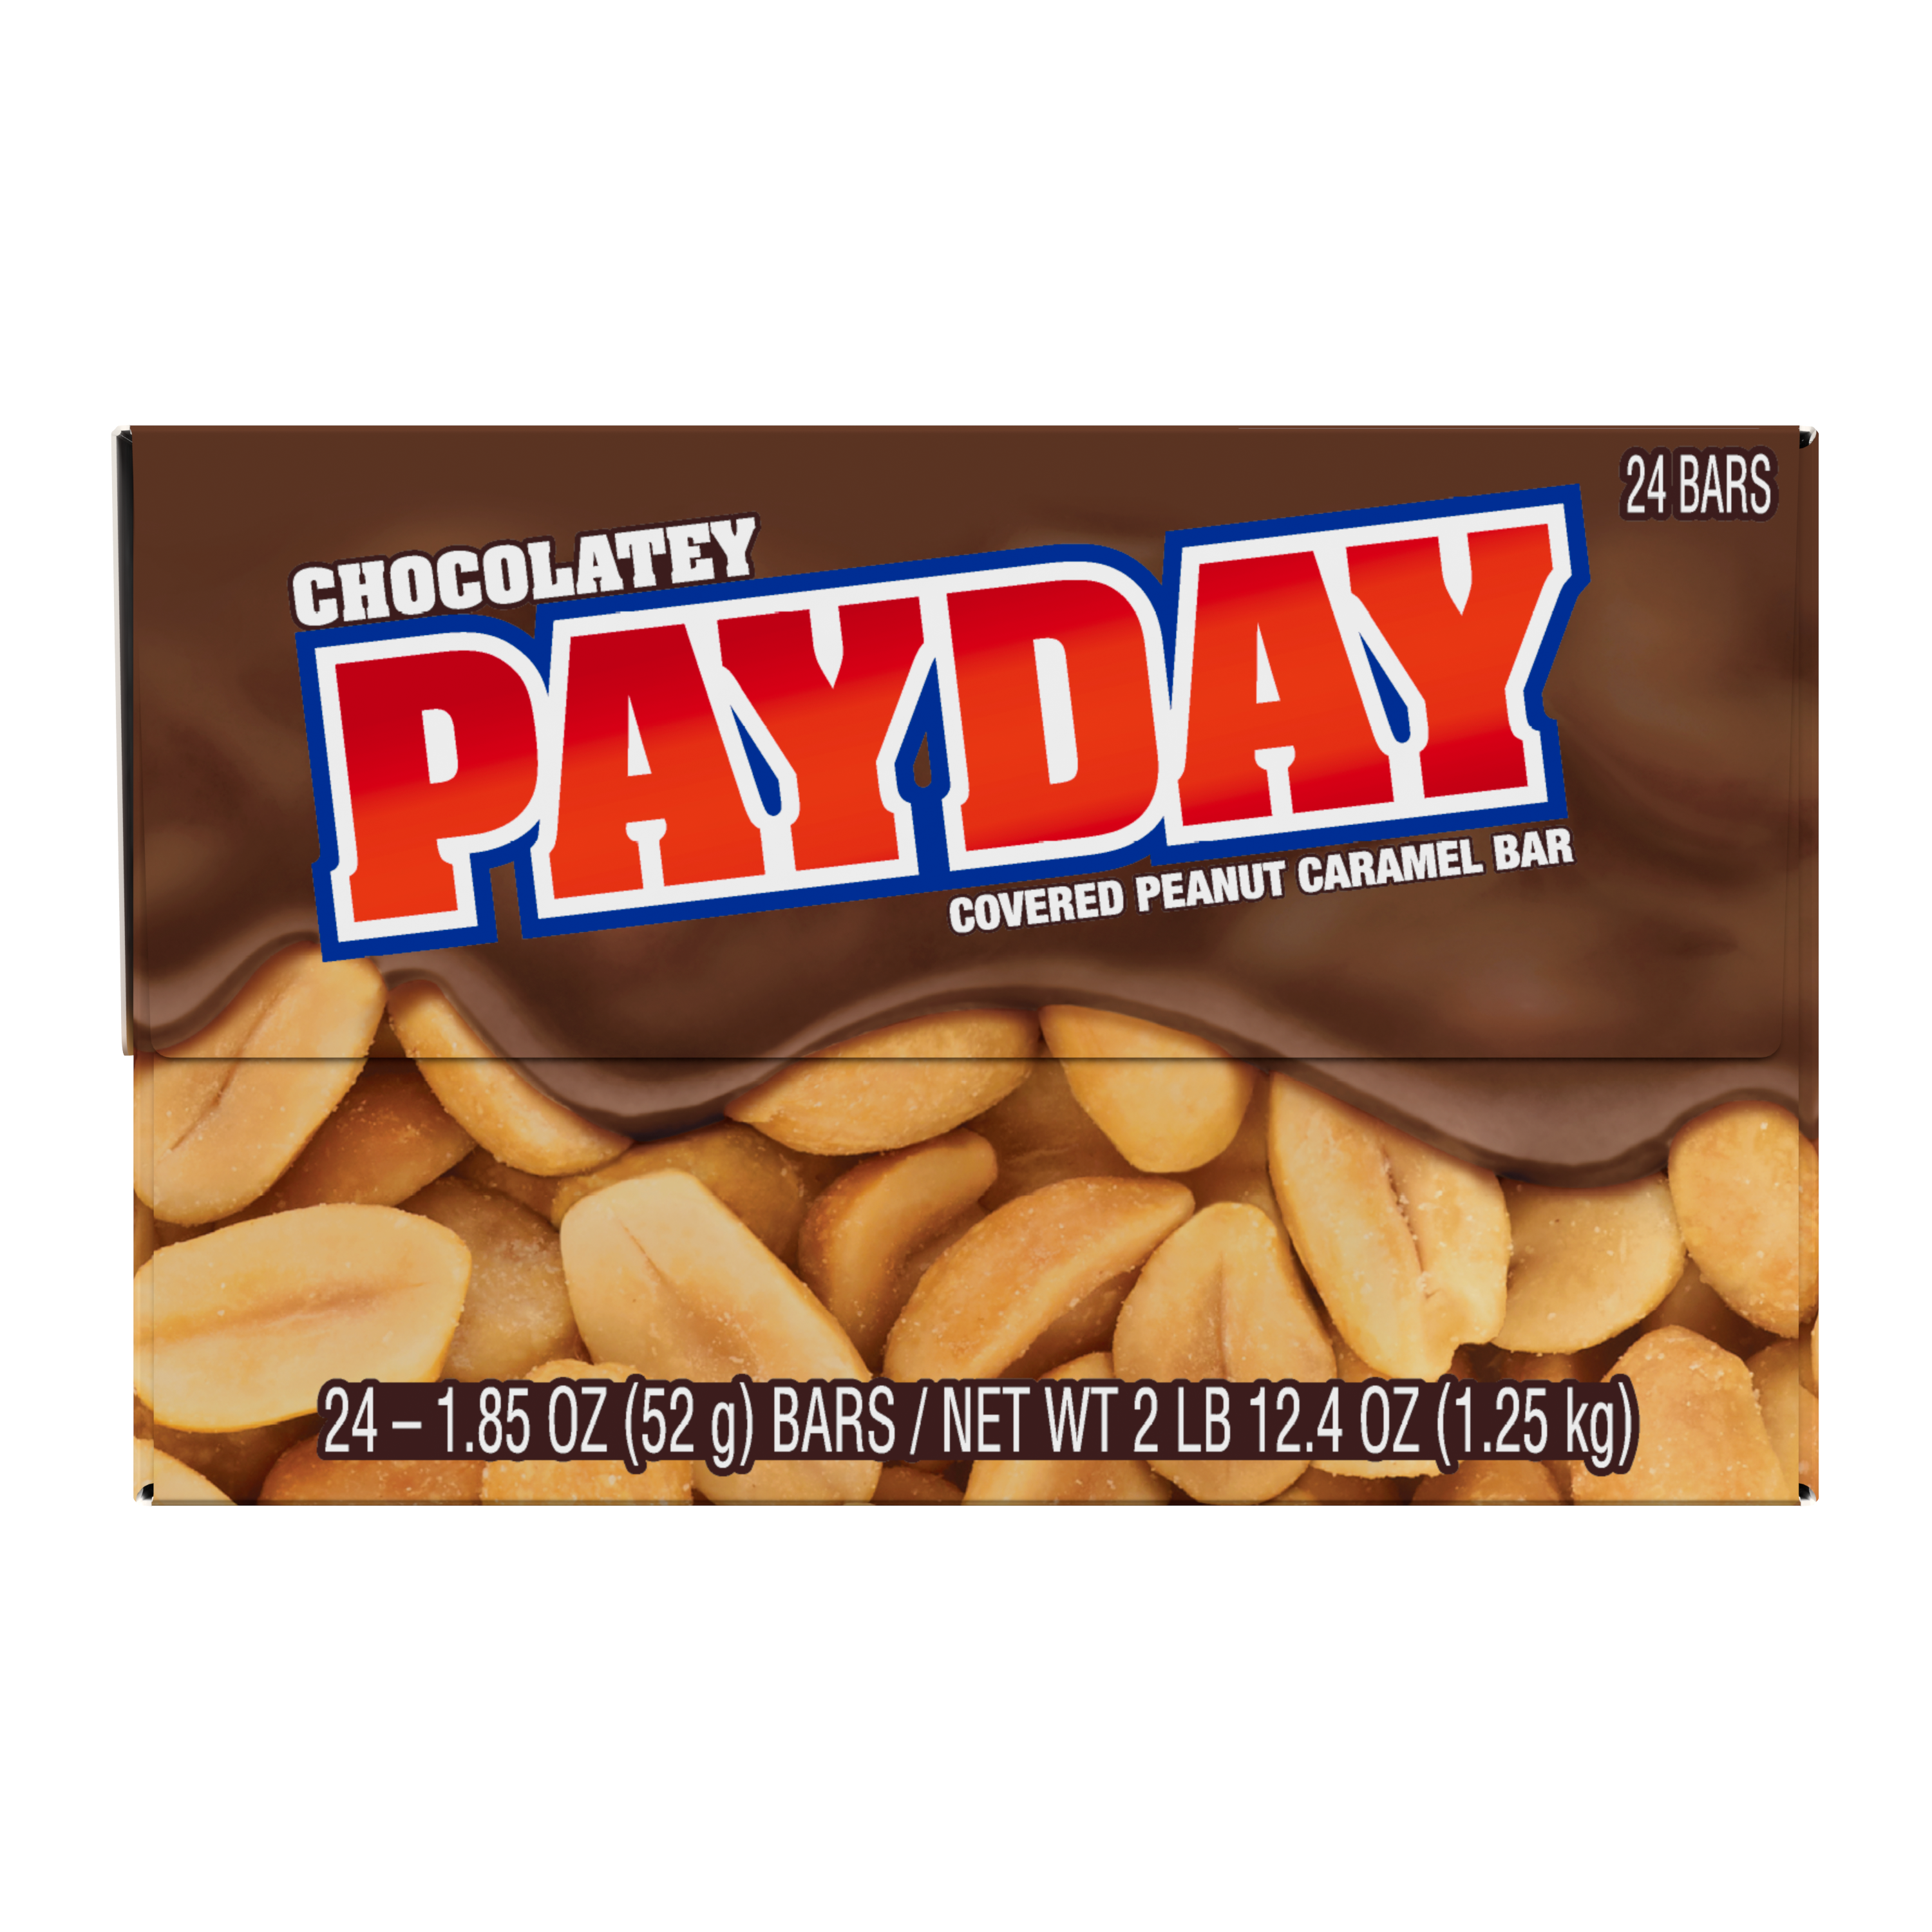 PAYDAY Chocolatey Covered Peanut and Caramel Candy Bars, 44.4 oz box, 24 pack - Front of Package